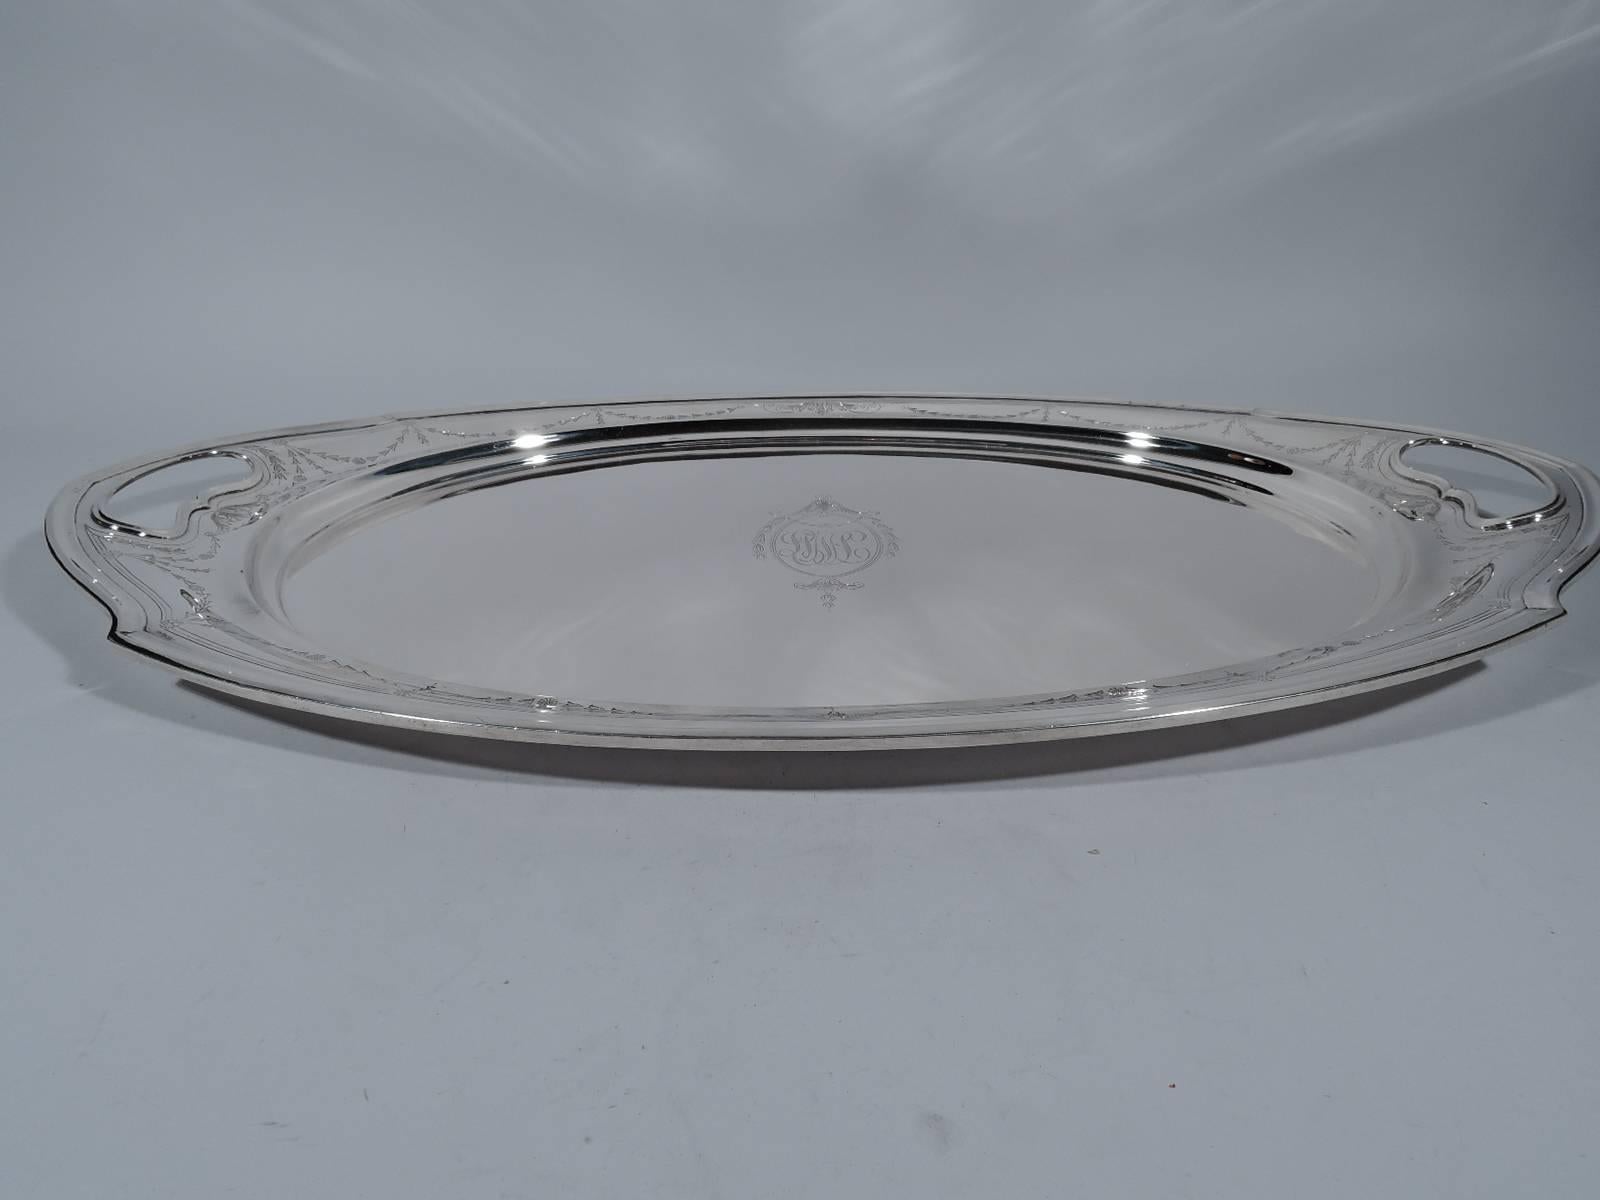 Edwardian sterling silver tea tray. Oval well with shaped and molded rim and pointed ends with cut-out kidney handles. Engraved Regency garland on shoulder. Well center has same style frame with interlaced script monogram. Hallmarked Joseph Seymour